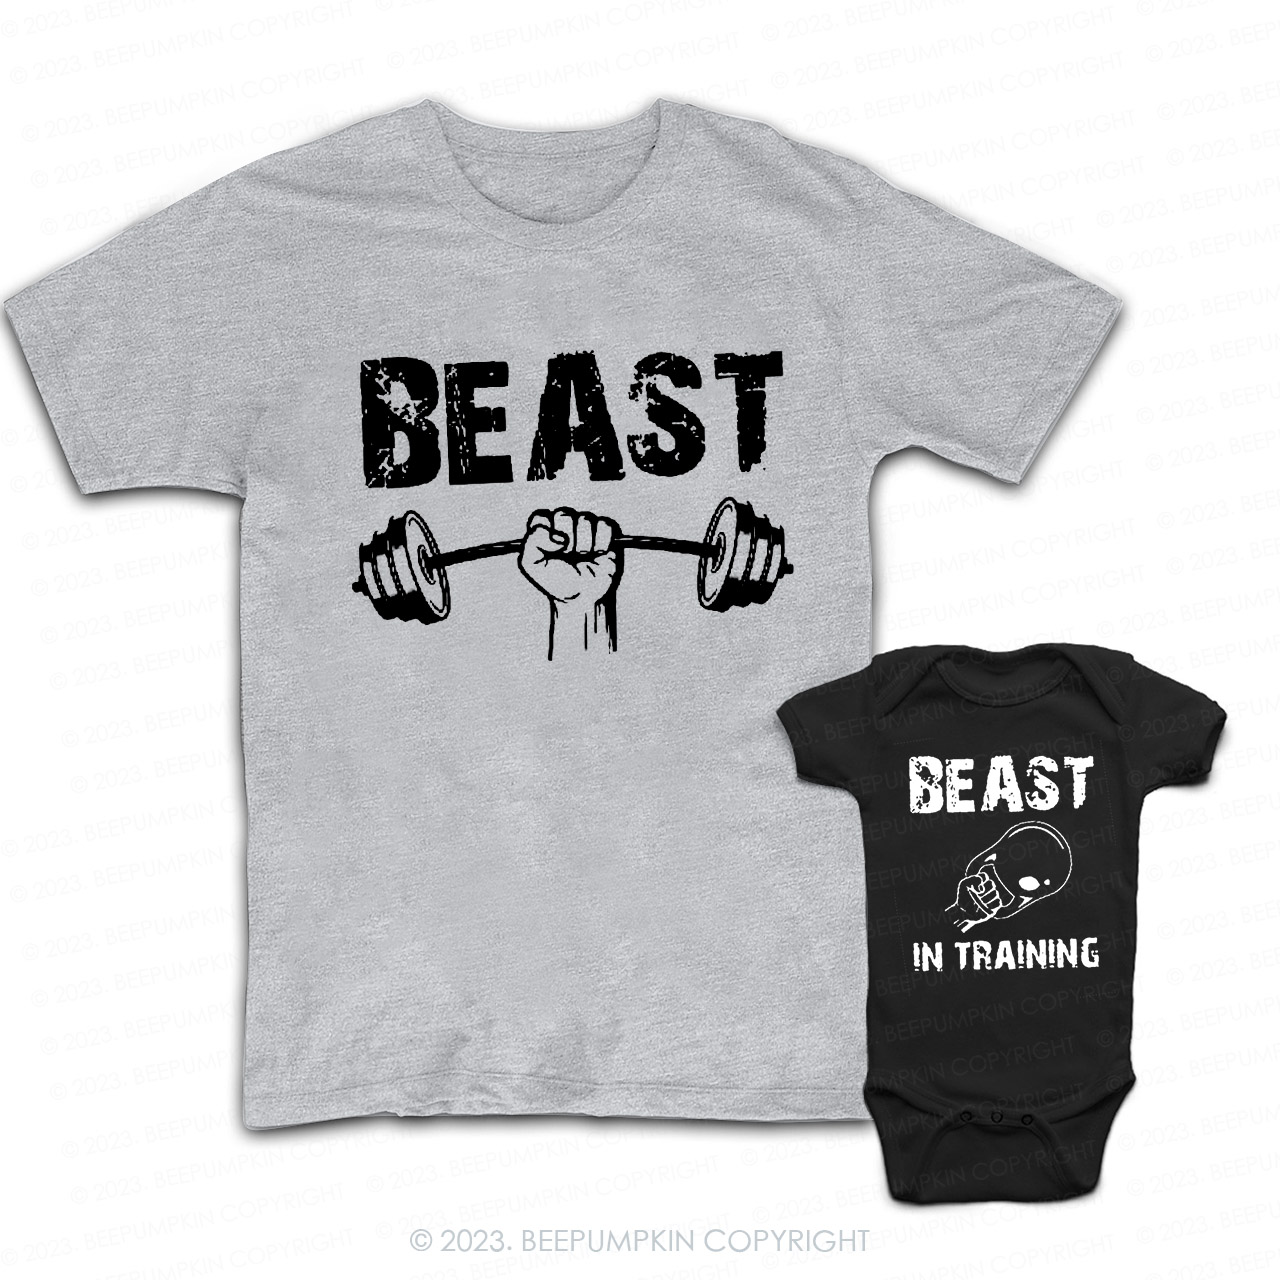 Beast & Beast In Training Matching Shirts For Dad&Me